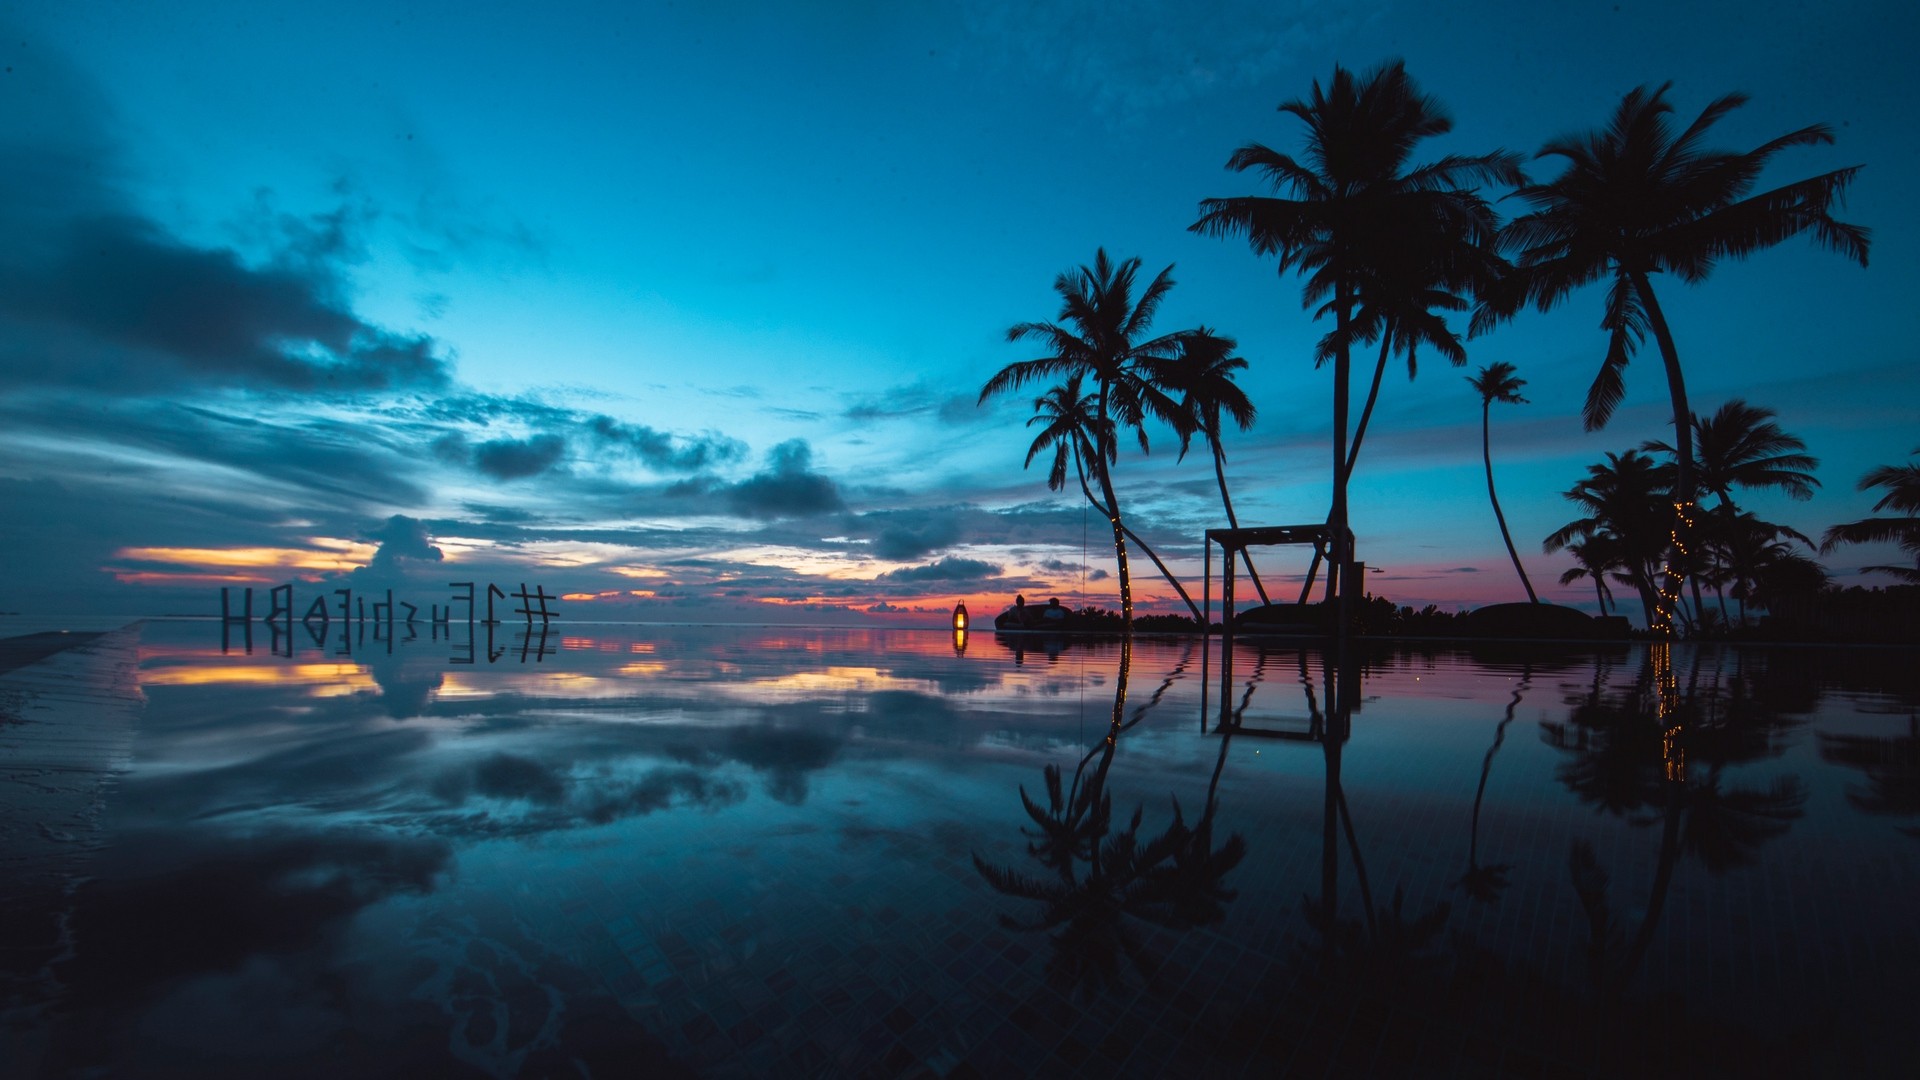 1920x1080 wallpapers: palm trees, sunset, ocean, evening (image)